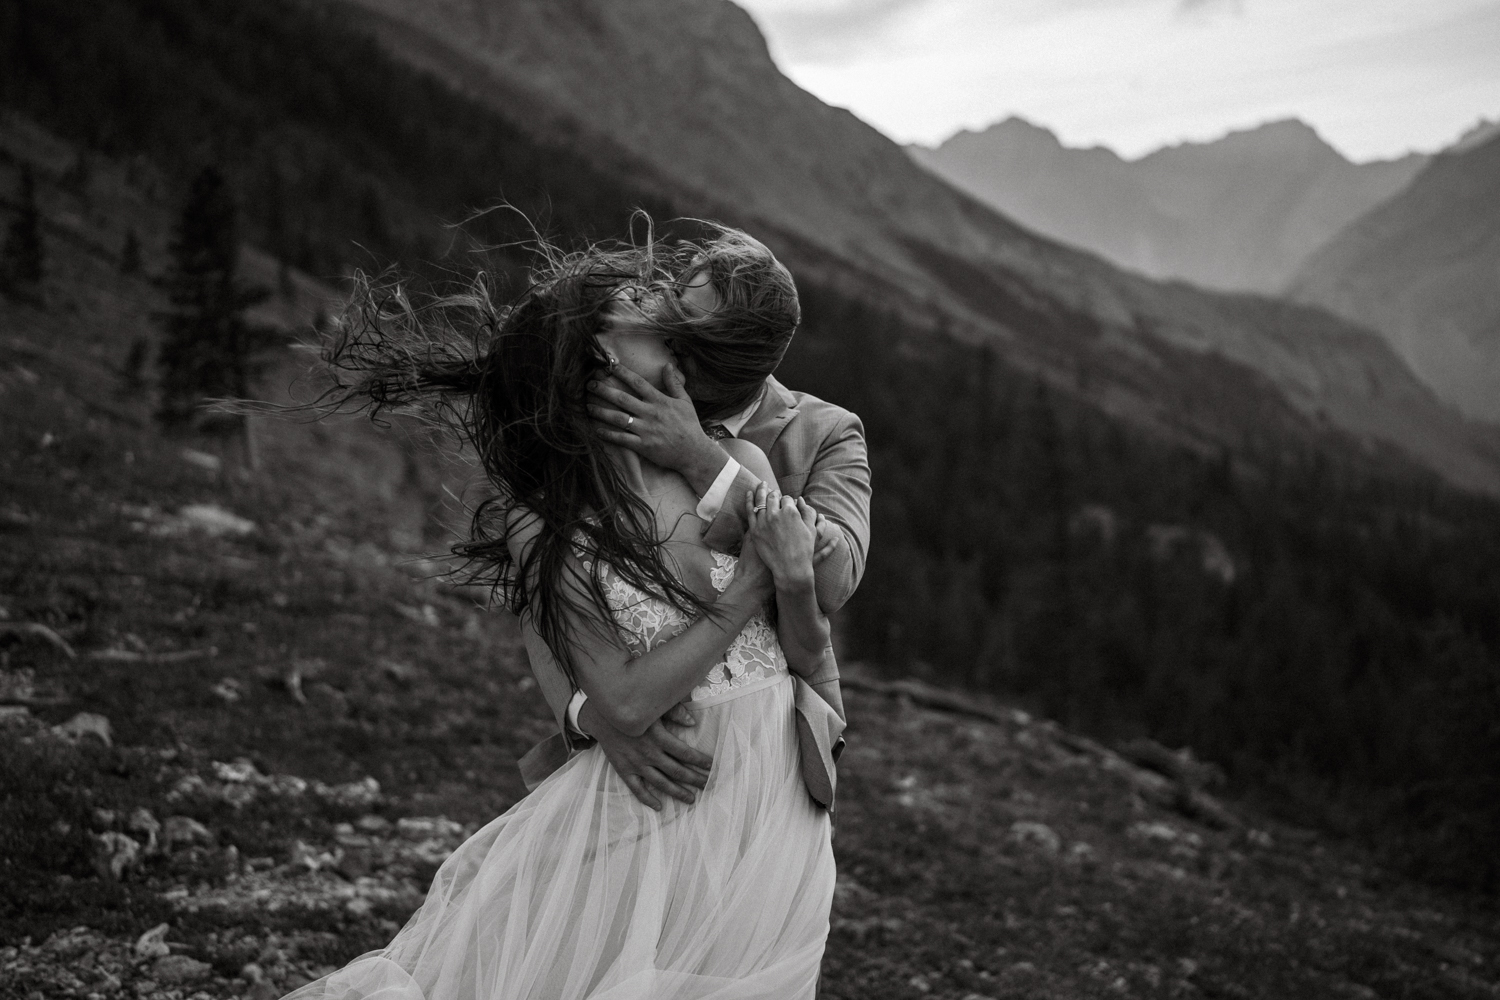 A tender moment between the couple captured at sunrise during their backcountry camping elopement in Kananaskis.